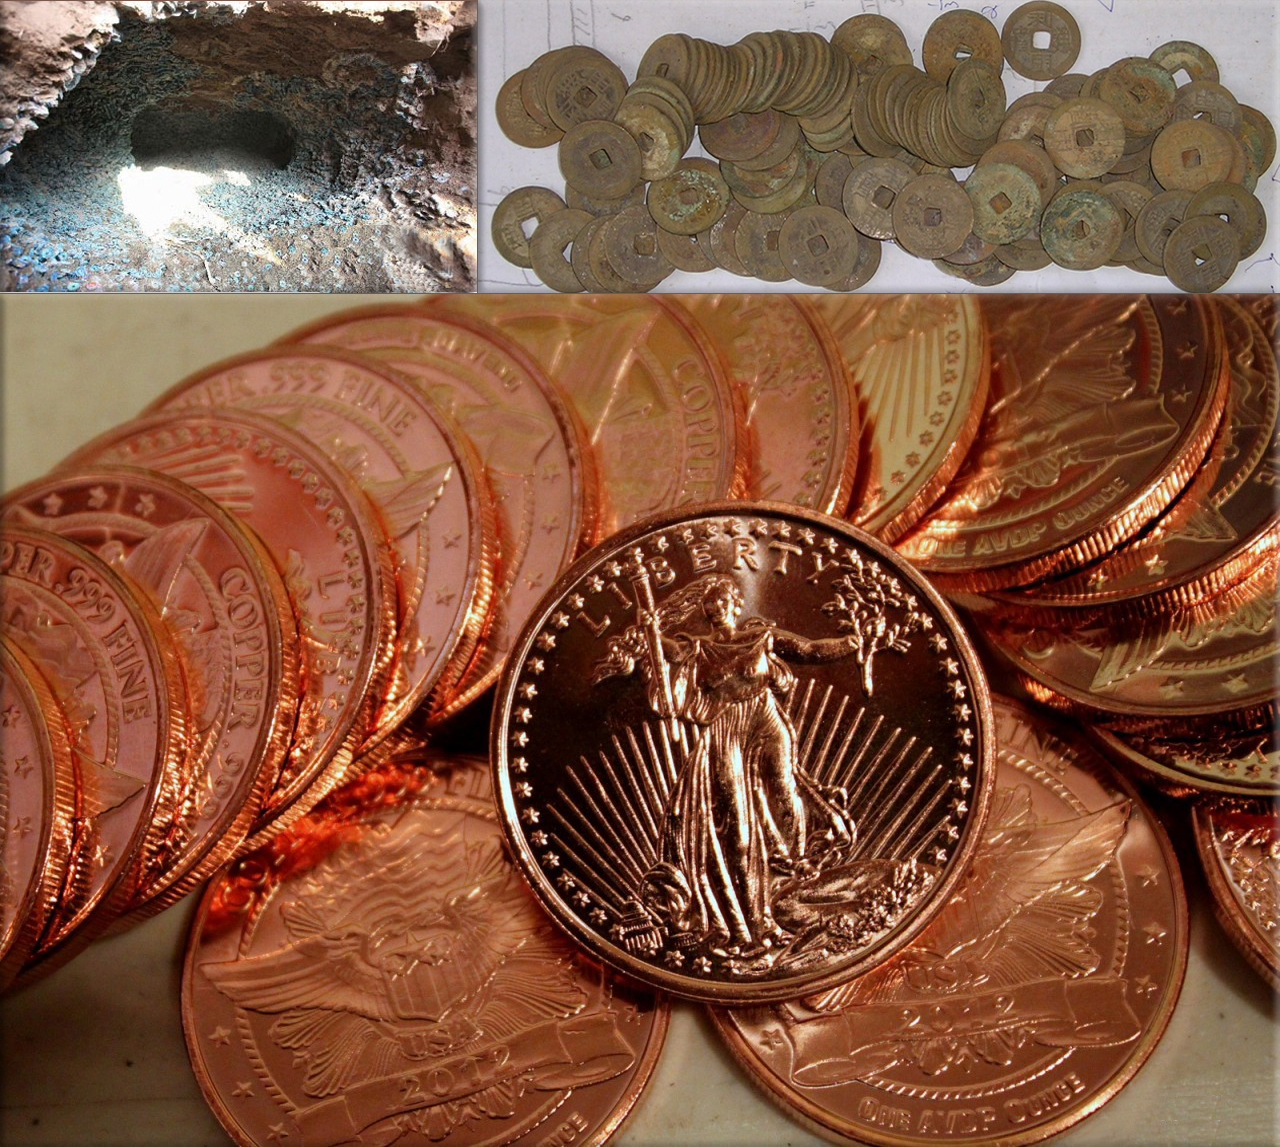 Coins: ● Ancient kiln, cache of copper coins excavated in Shaanxi ● Ancient copper coins ● U.S. Liberty copper coins.